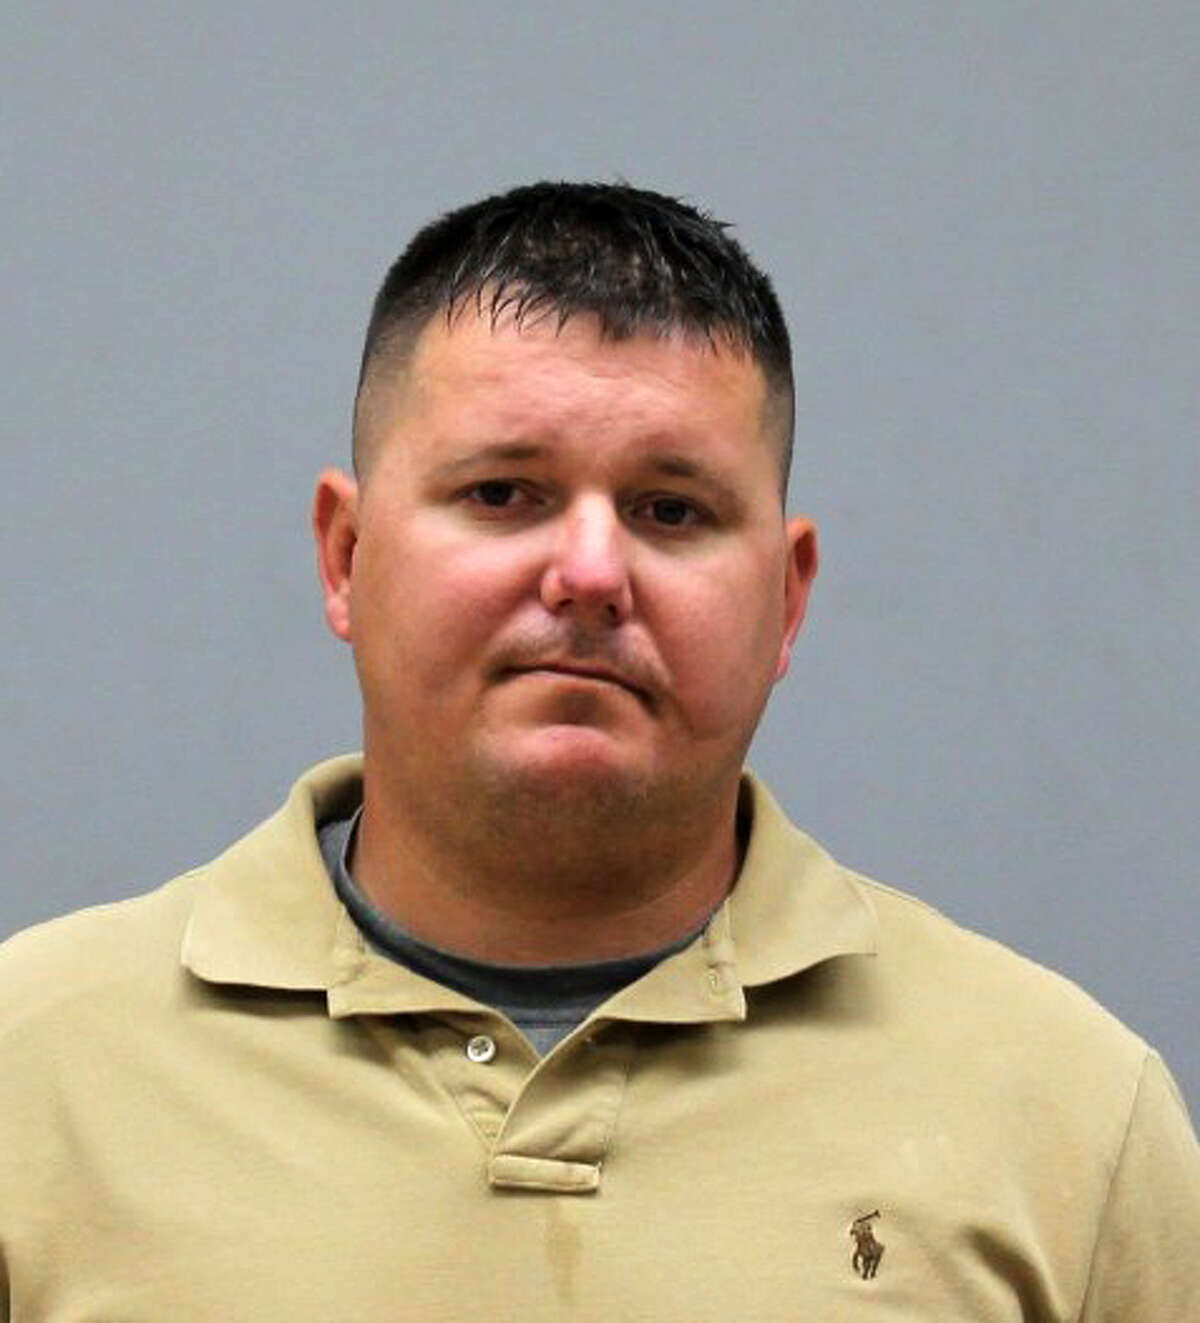 John Biehn, a former Bridgeport cop was arrested Monday, Dec. 15, 2014 for DUI after leaving court, fighting a DUI Case. Ten years ago, Biehn was accused of going on a drunken shooting rampage at a Bridgeport housing complex. John Biehn, 39, was arrested twice more over the next 12 hours âÄî for drunken driving in Wallingford Monday night and shoplifting early Tuesday.